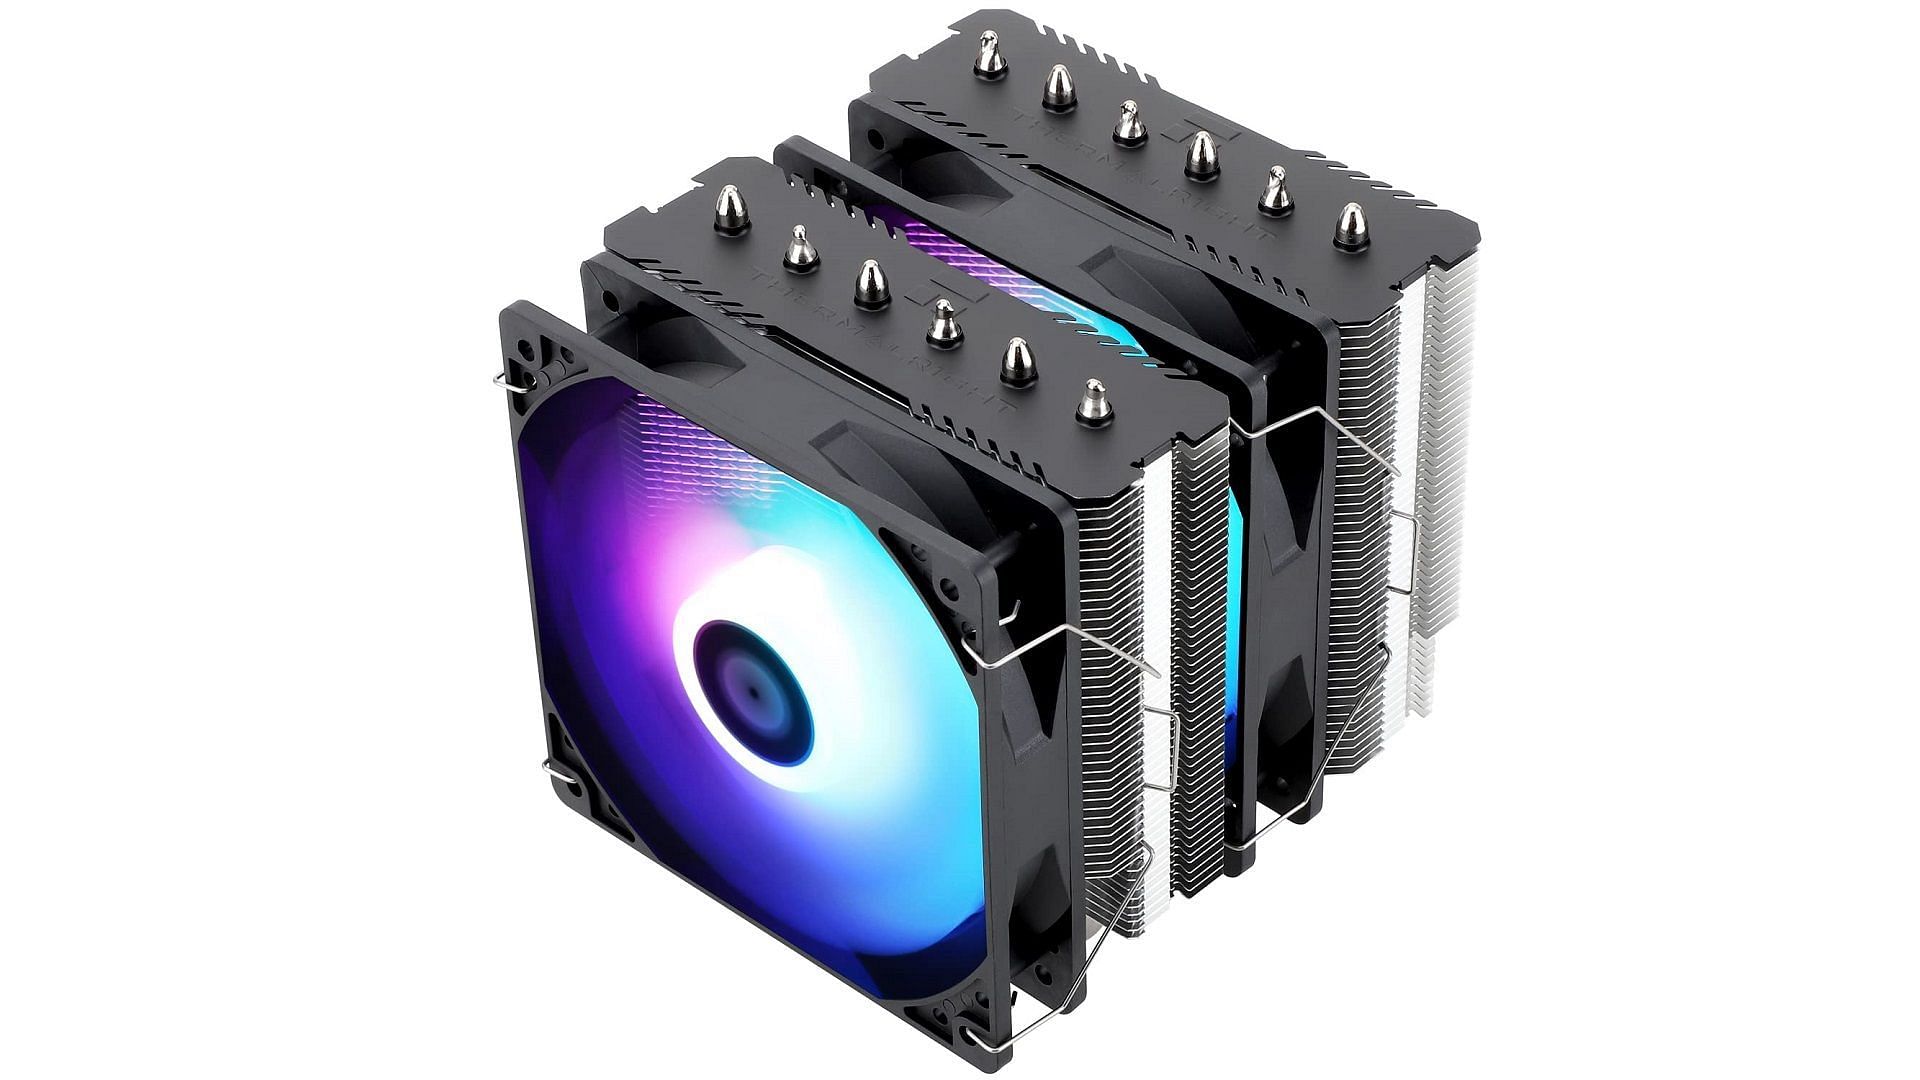 Thermalright Peerless Assassin 120 SE ARGB CPU air cooler (Image via Thermalright)